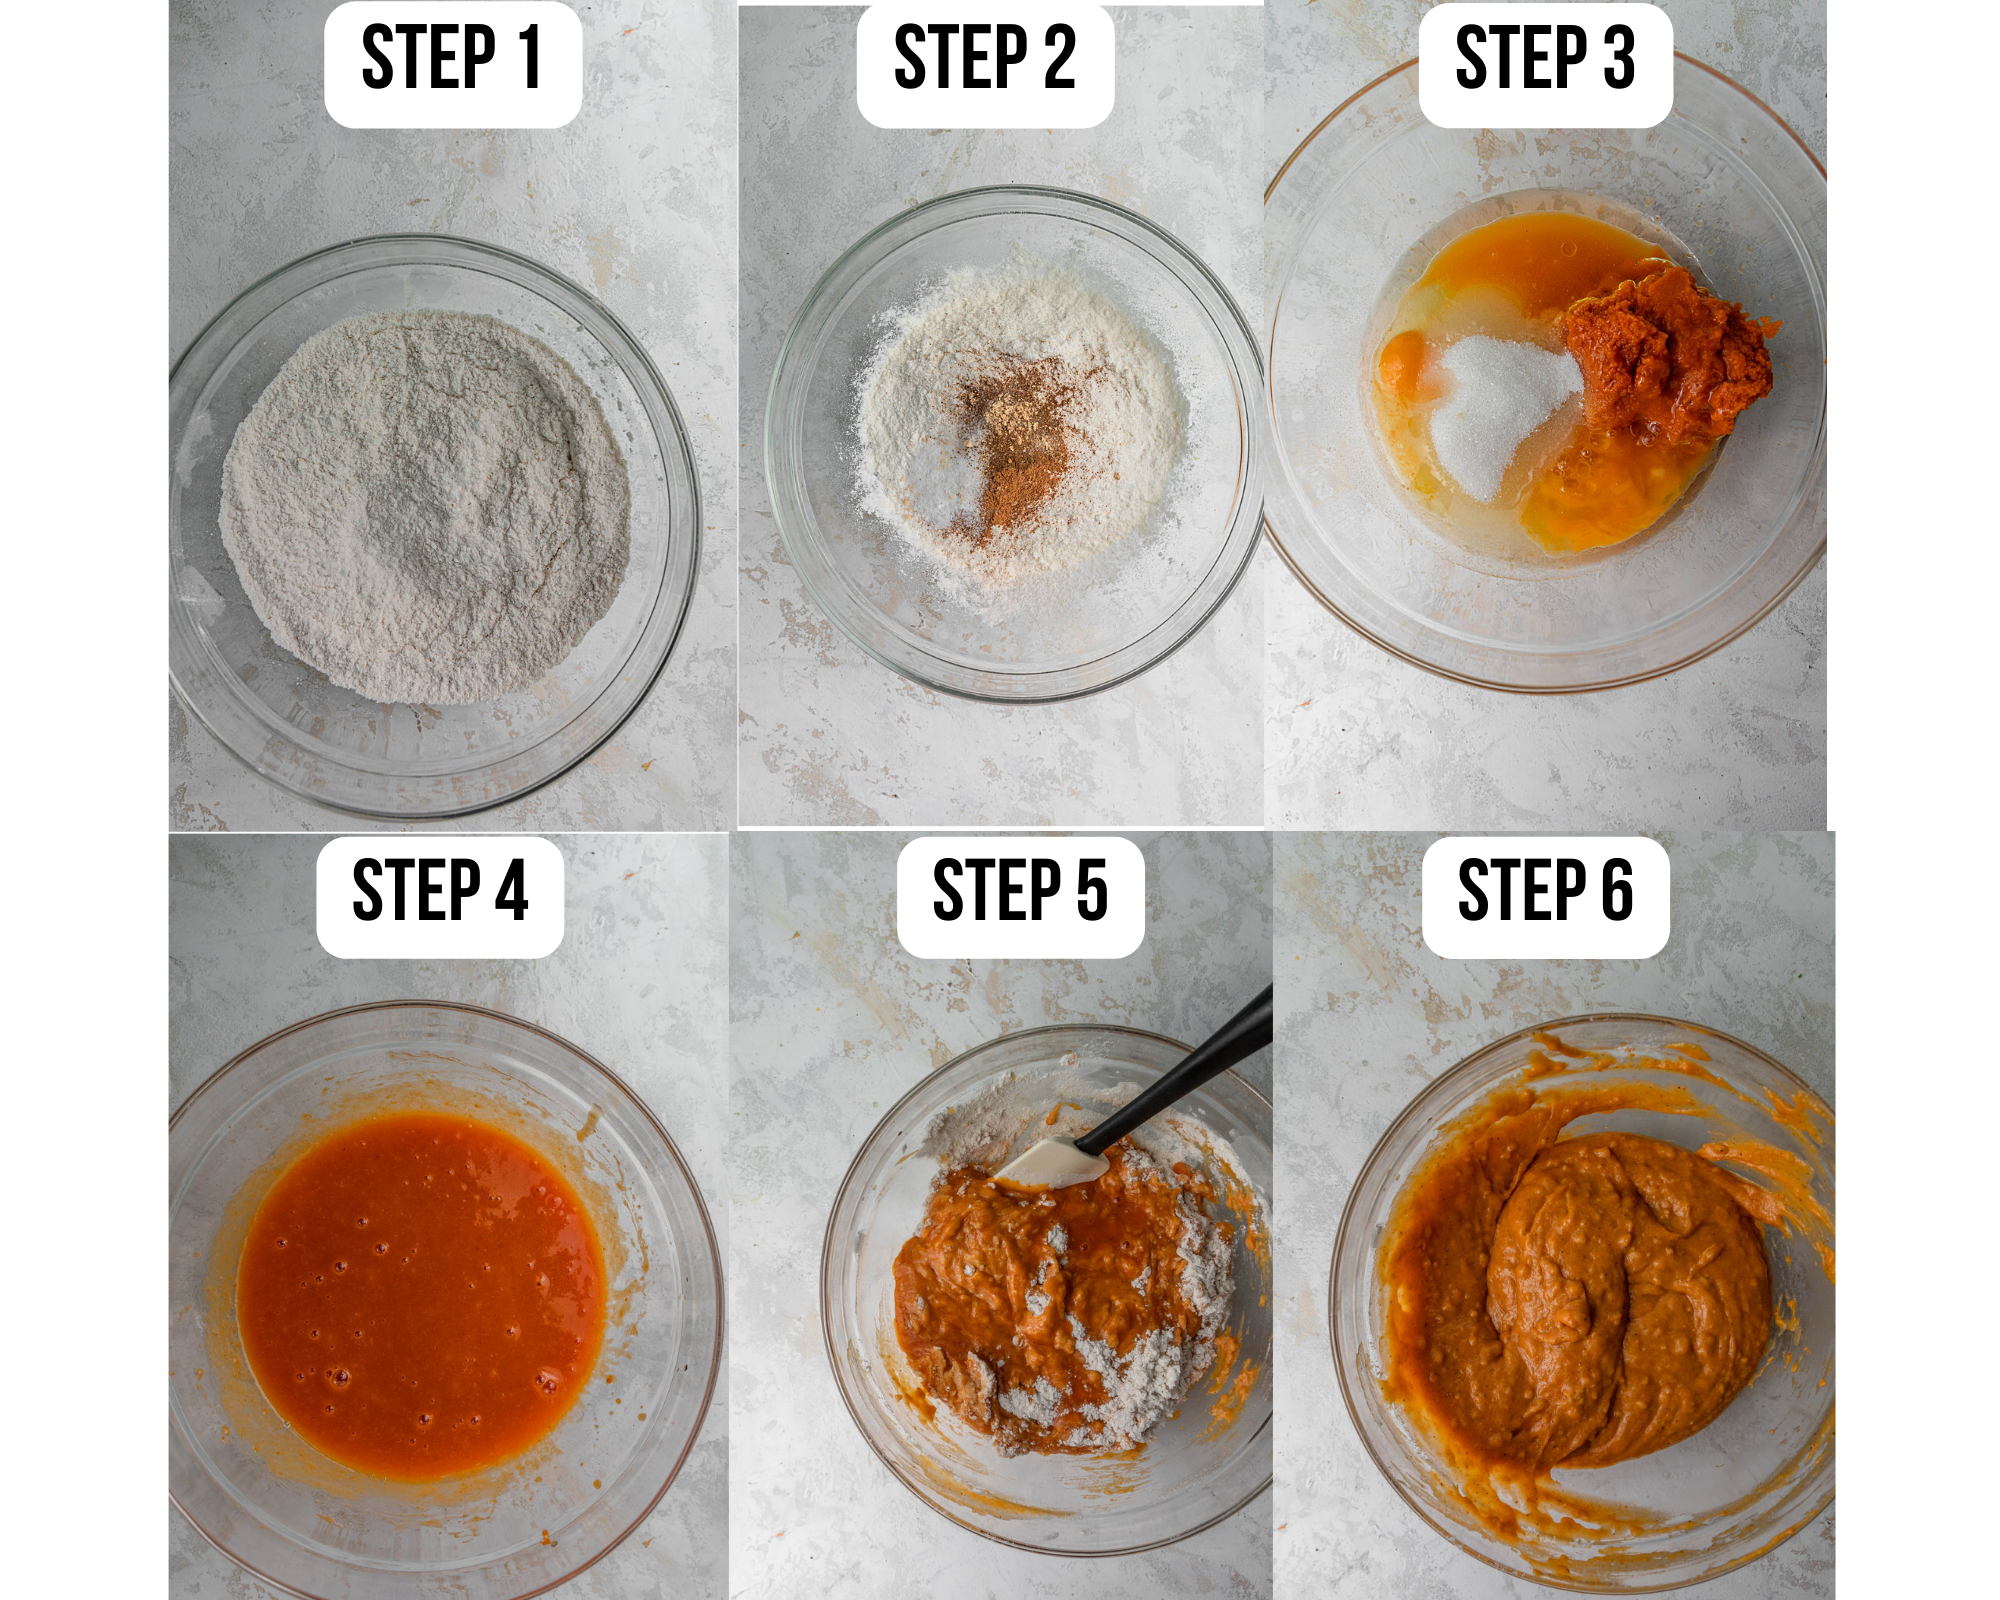 Step by step photos of making pumpkin bread.